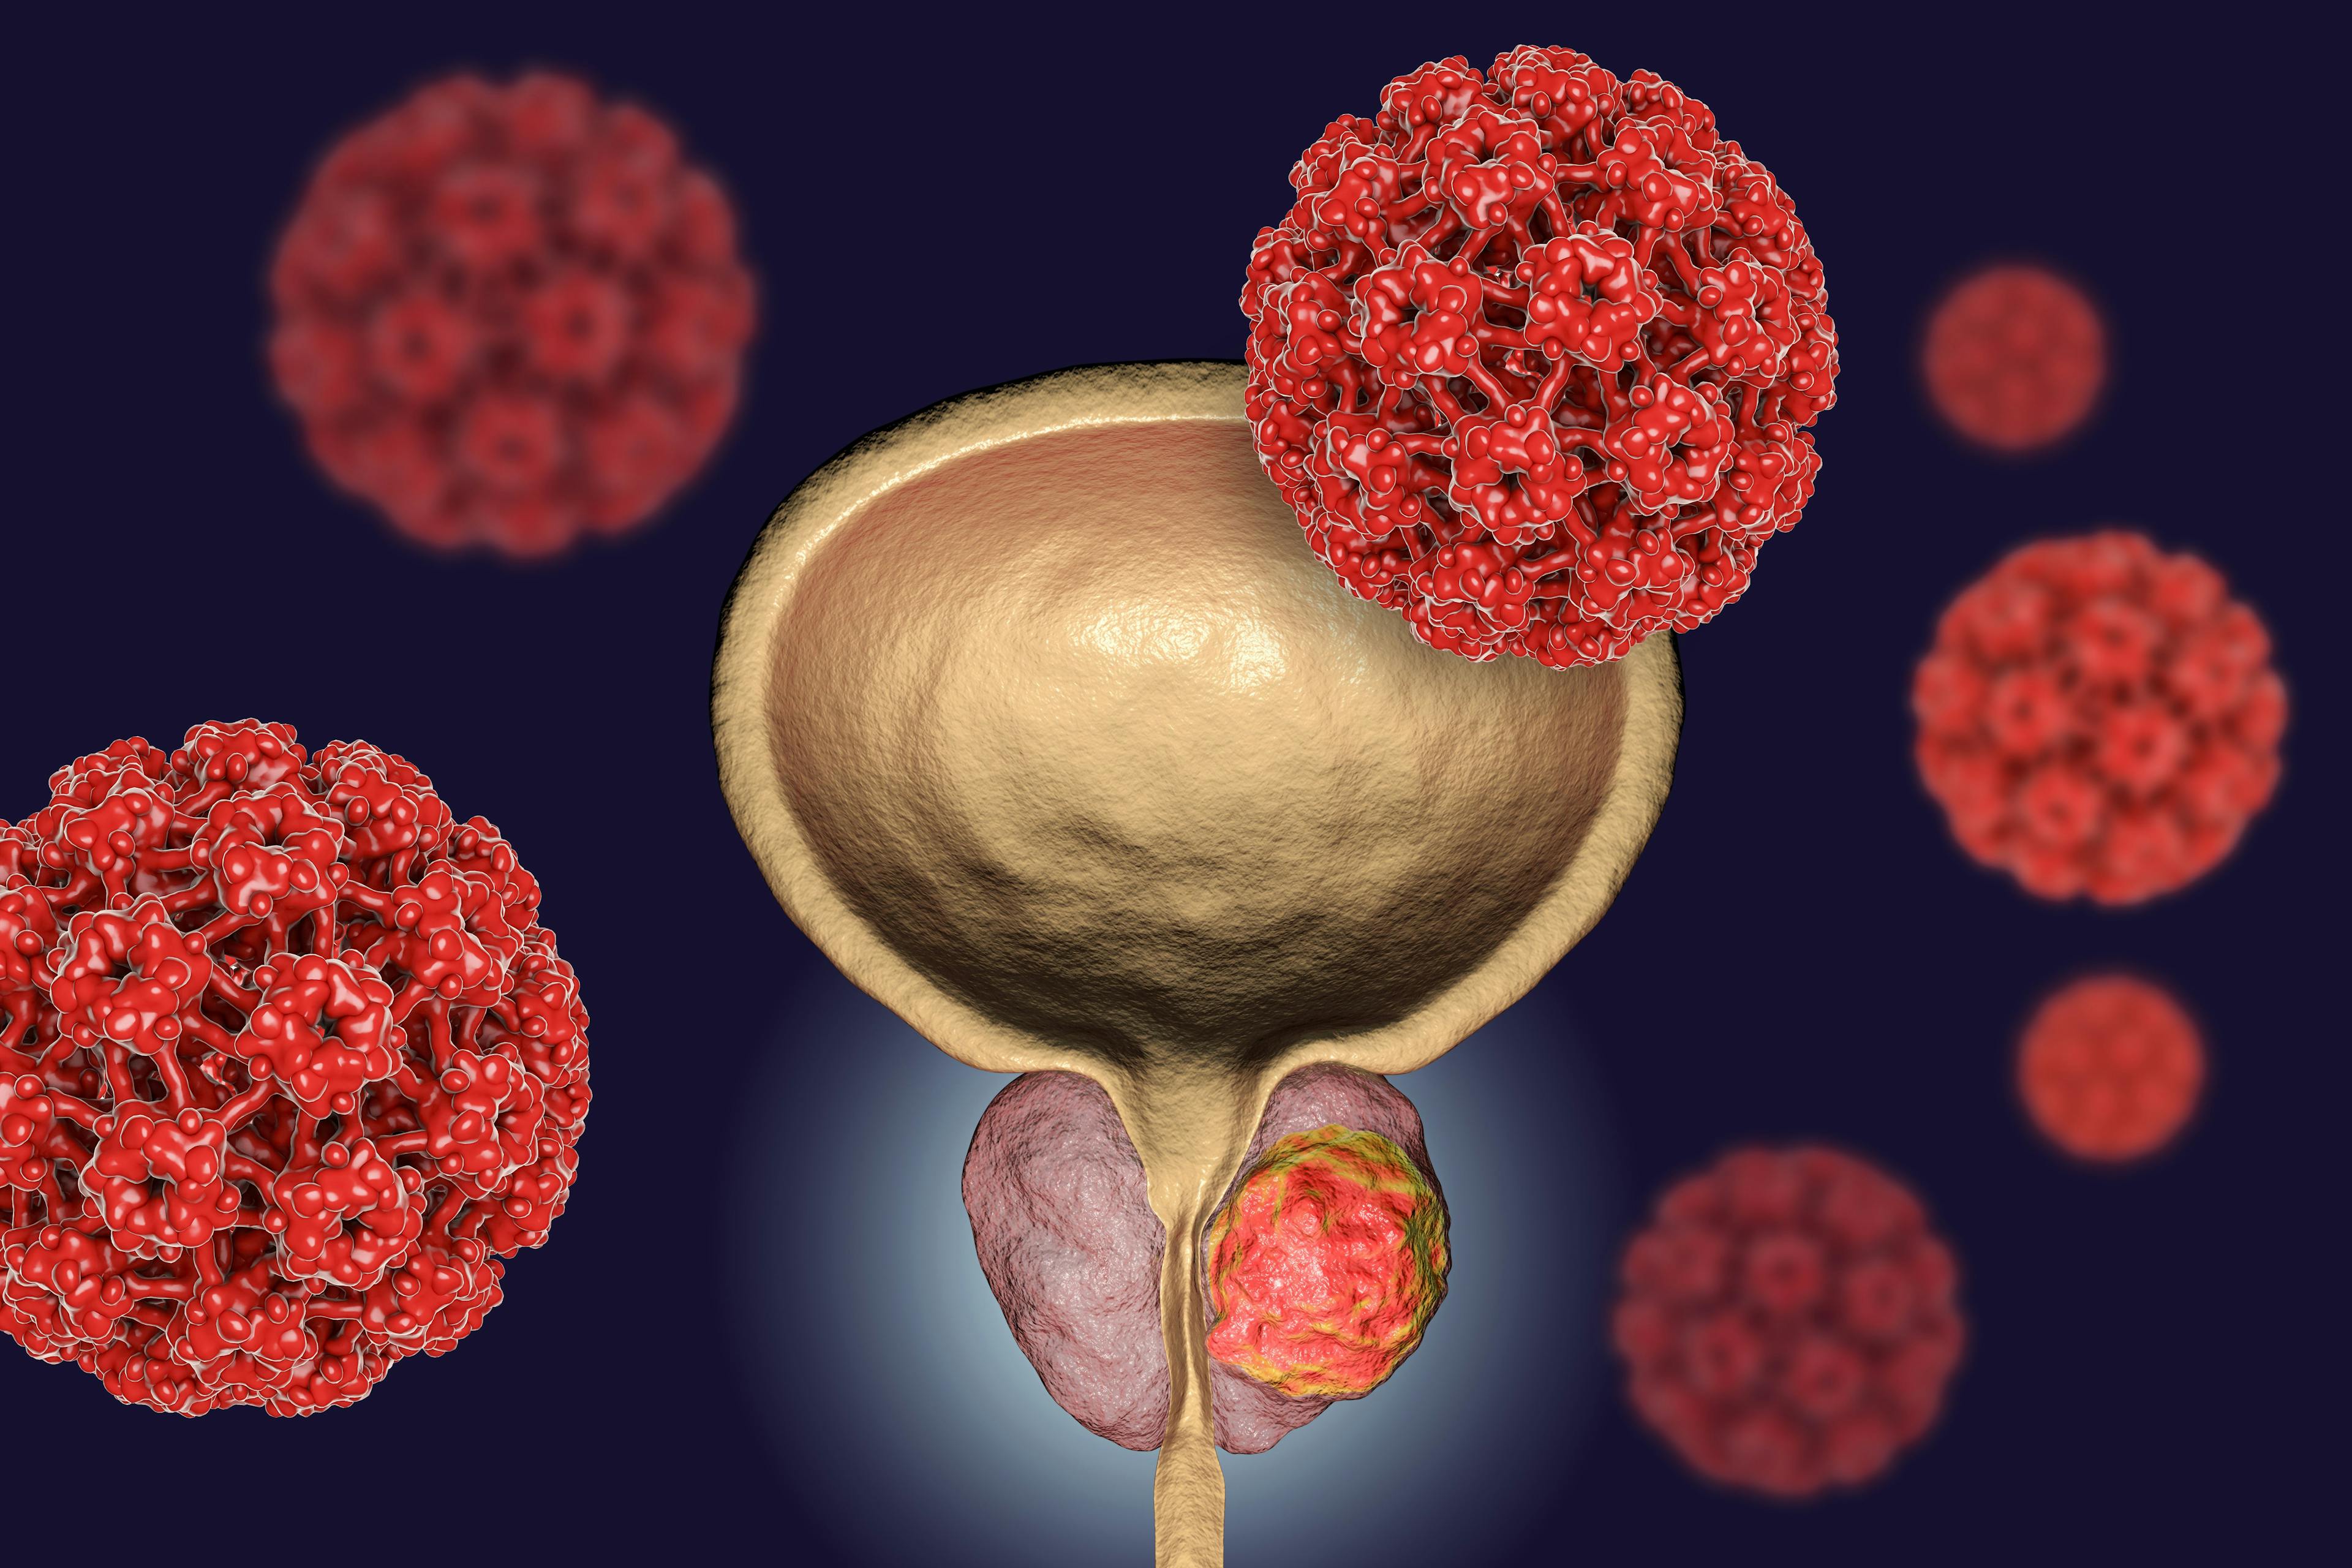 Therapies in the Pipeline for Prostate Cancer